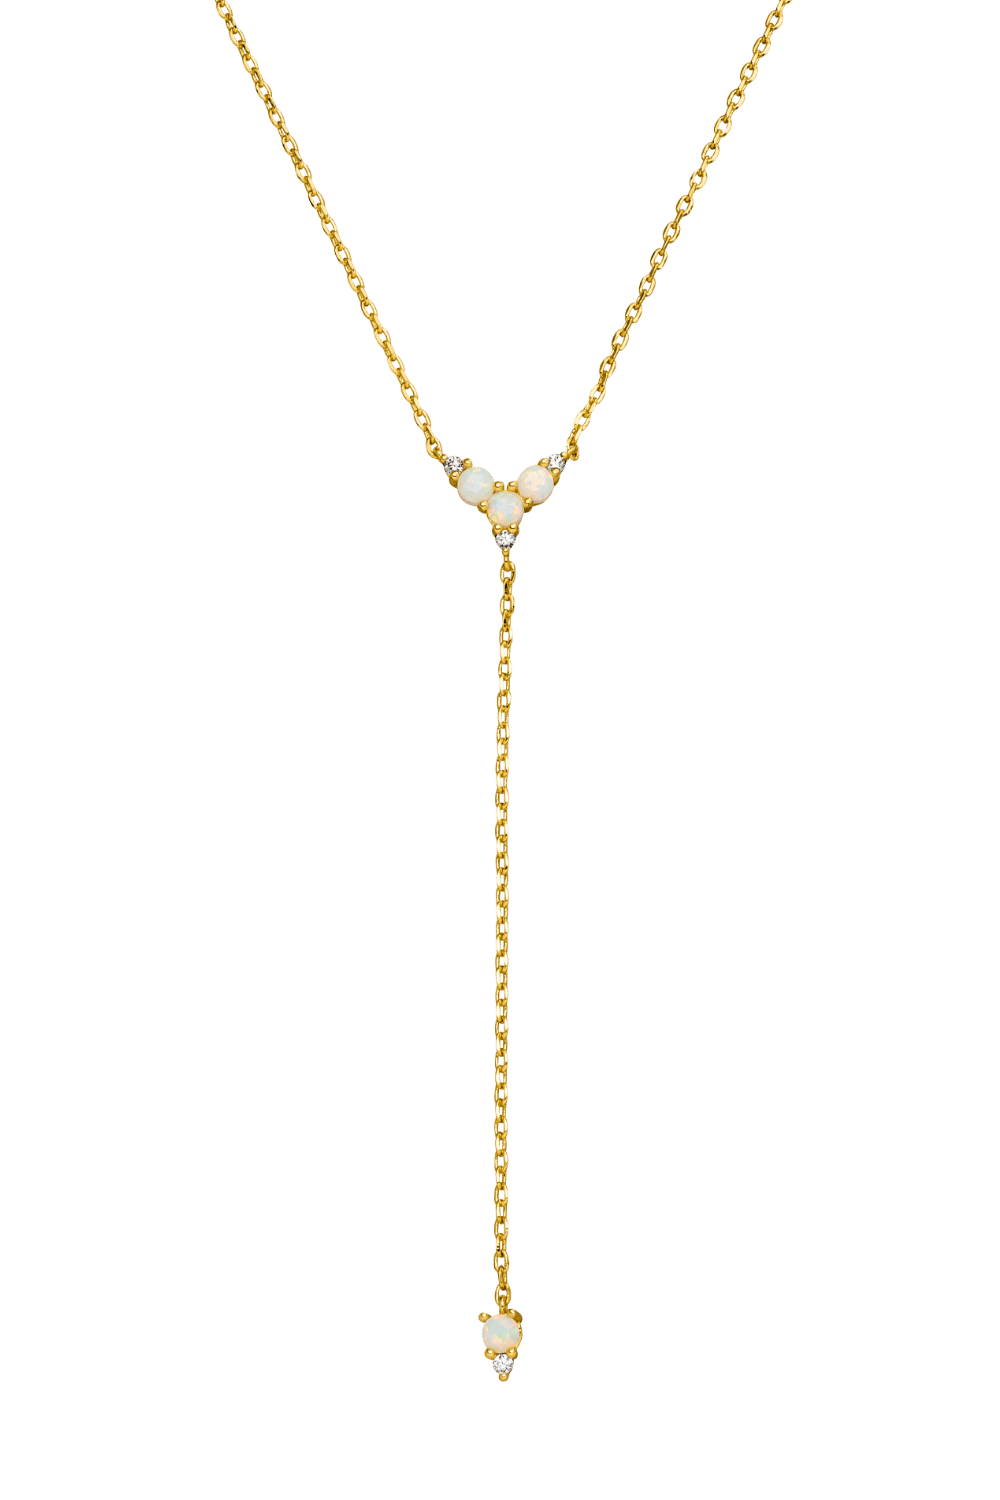 Necklaces for her at PAUL VALENTINE – quality & elegance